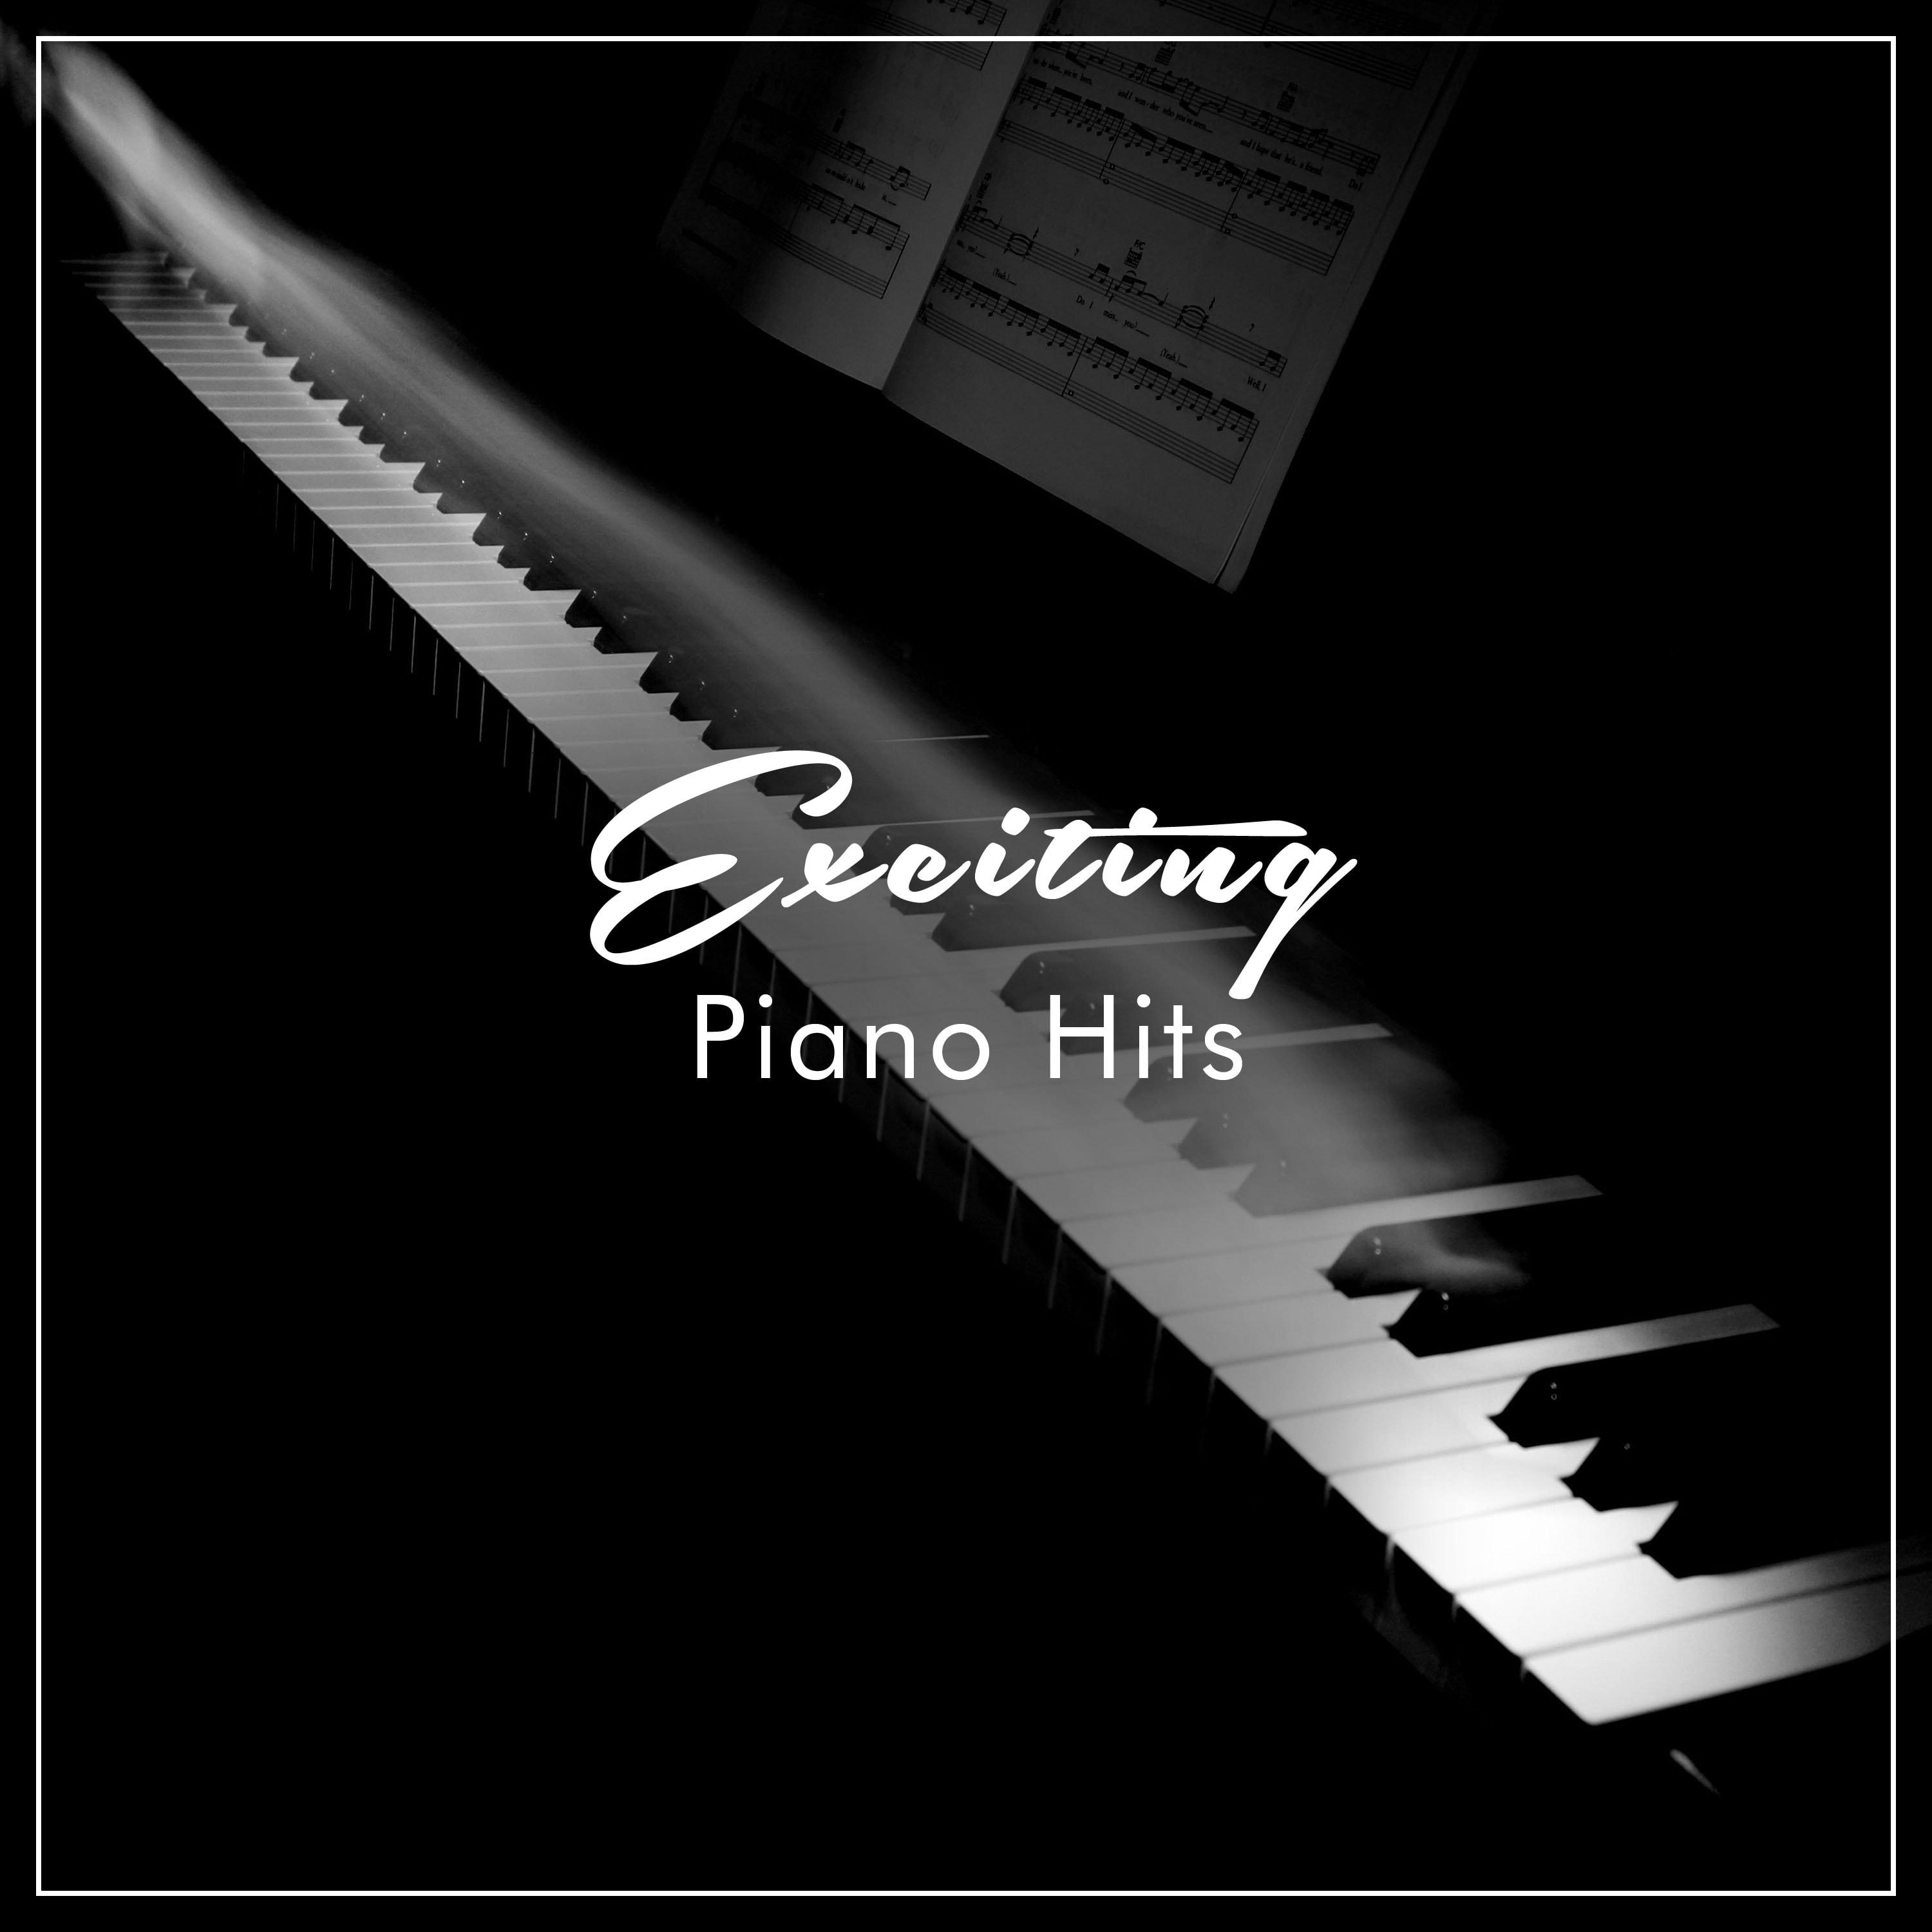 #12 Exciting Piano Hits